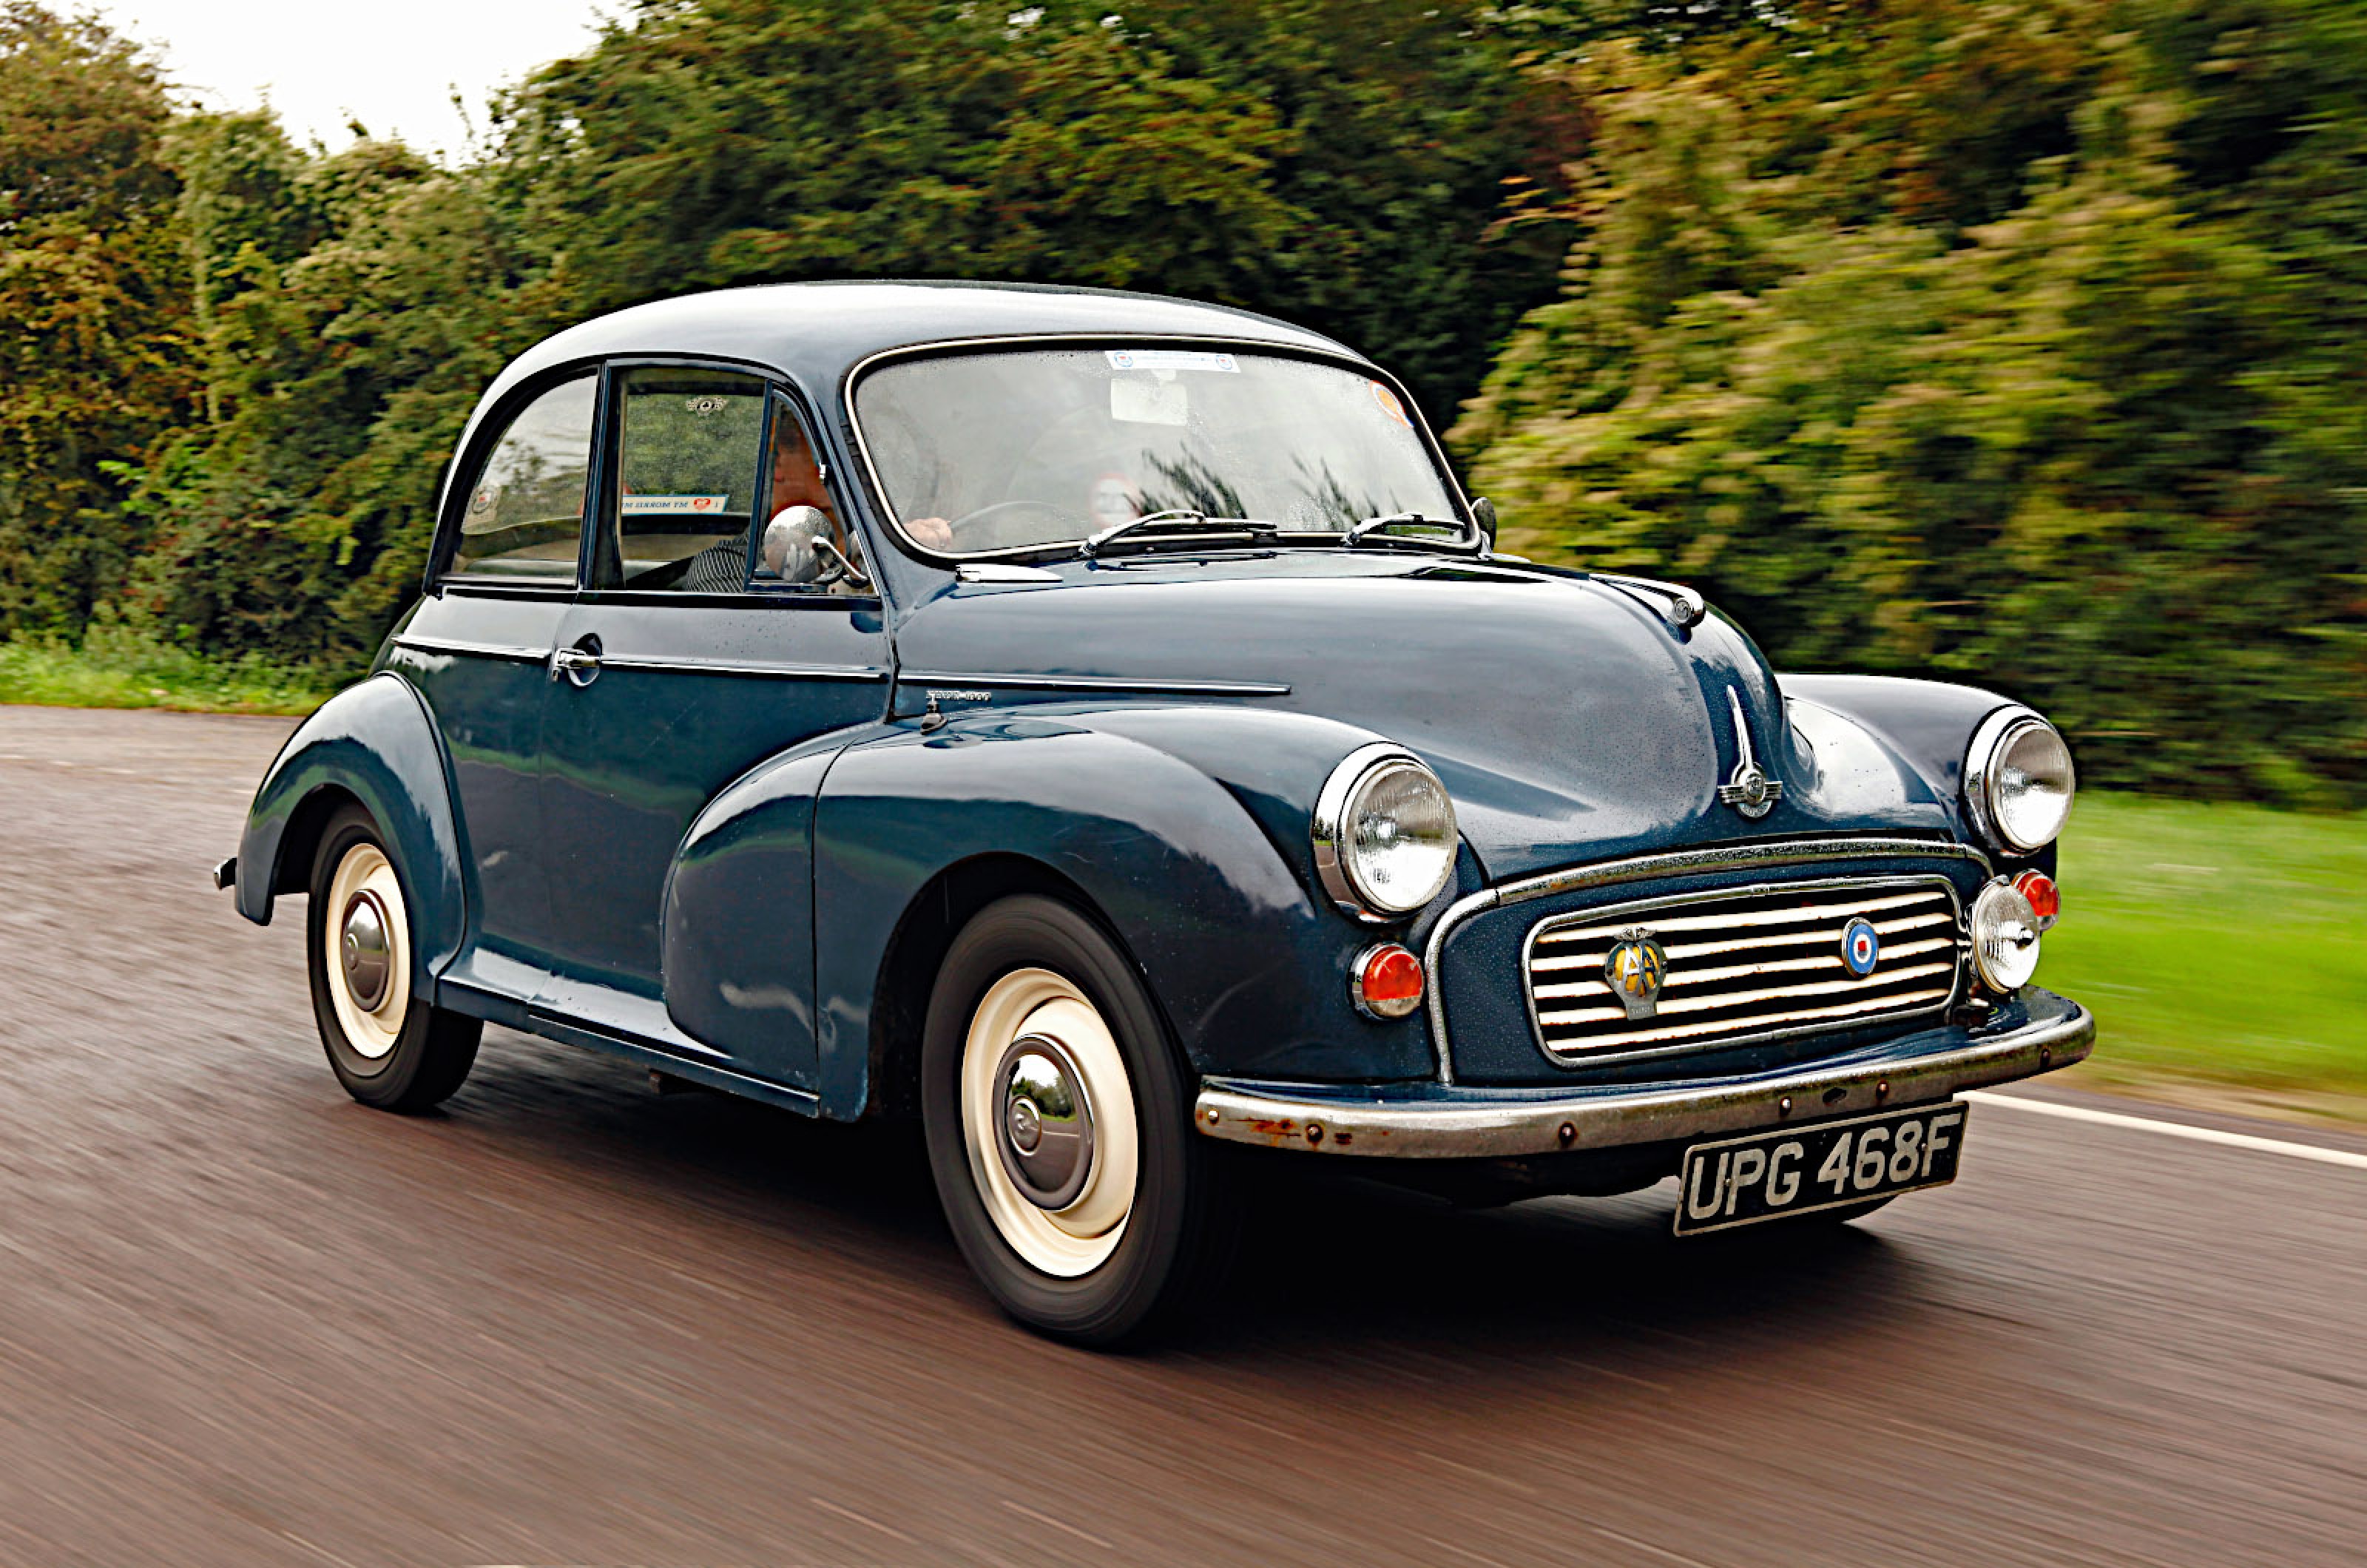 <p>Like the Peugeot 402, the Minor as launched in 1948 looks strange to us now because of the placement of its headlights.</p>  <p>These were mounted unusually low down, on either side of the radiator grille.</p>  <p>In 1951, the year before Morris was merged with Austin to form the British Motor Corporation and the Minor was substantially re-engineered, they were raised more or less to the top of the front fenders, where they remained until production ended 20 years later.</p>  <p>The body, essentially a scaled-down version of the one used for the 1948 Morris Oxford, remained the same, but the repositioned lights made it much more obvious that it had been inspired by the American cars of the early 1940s.</p>